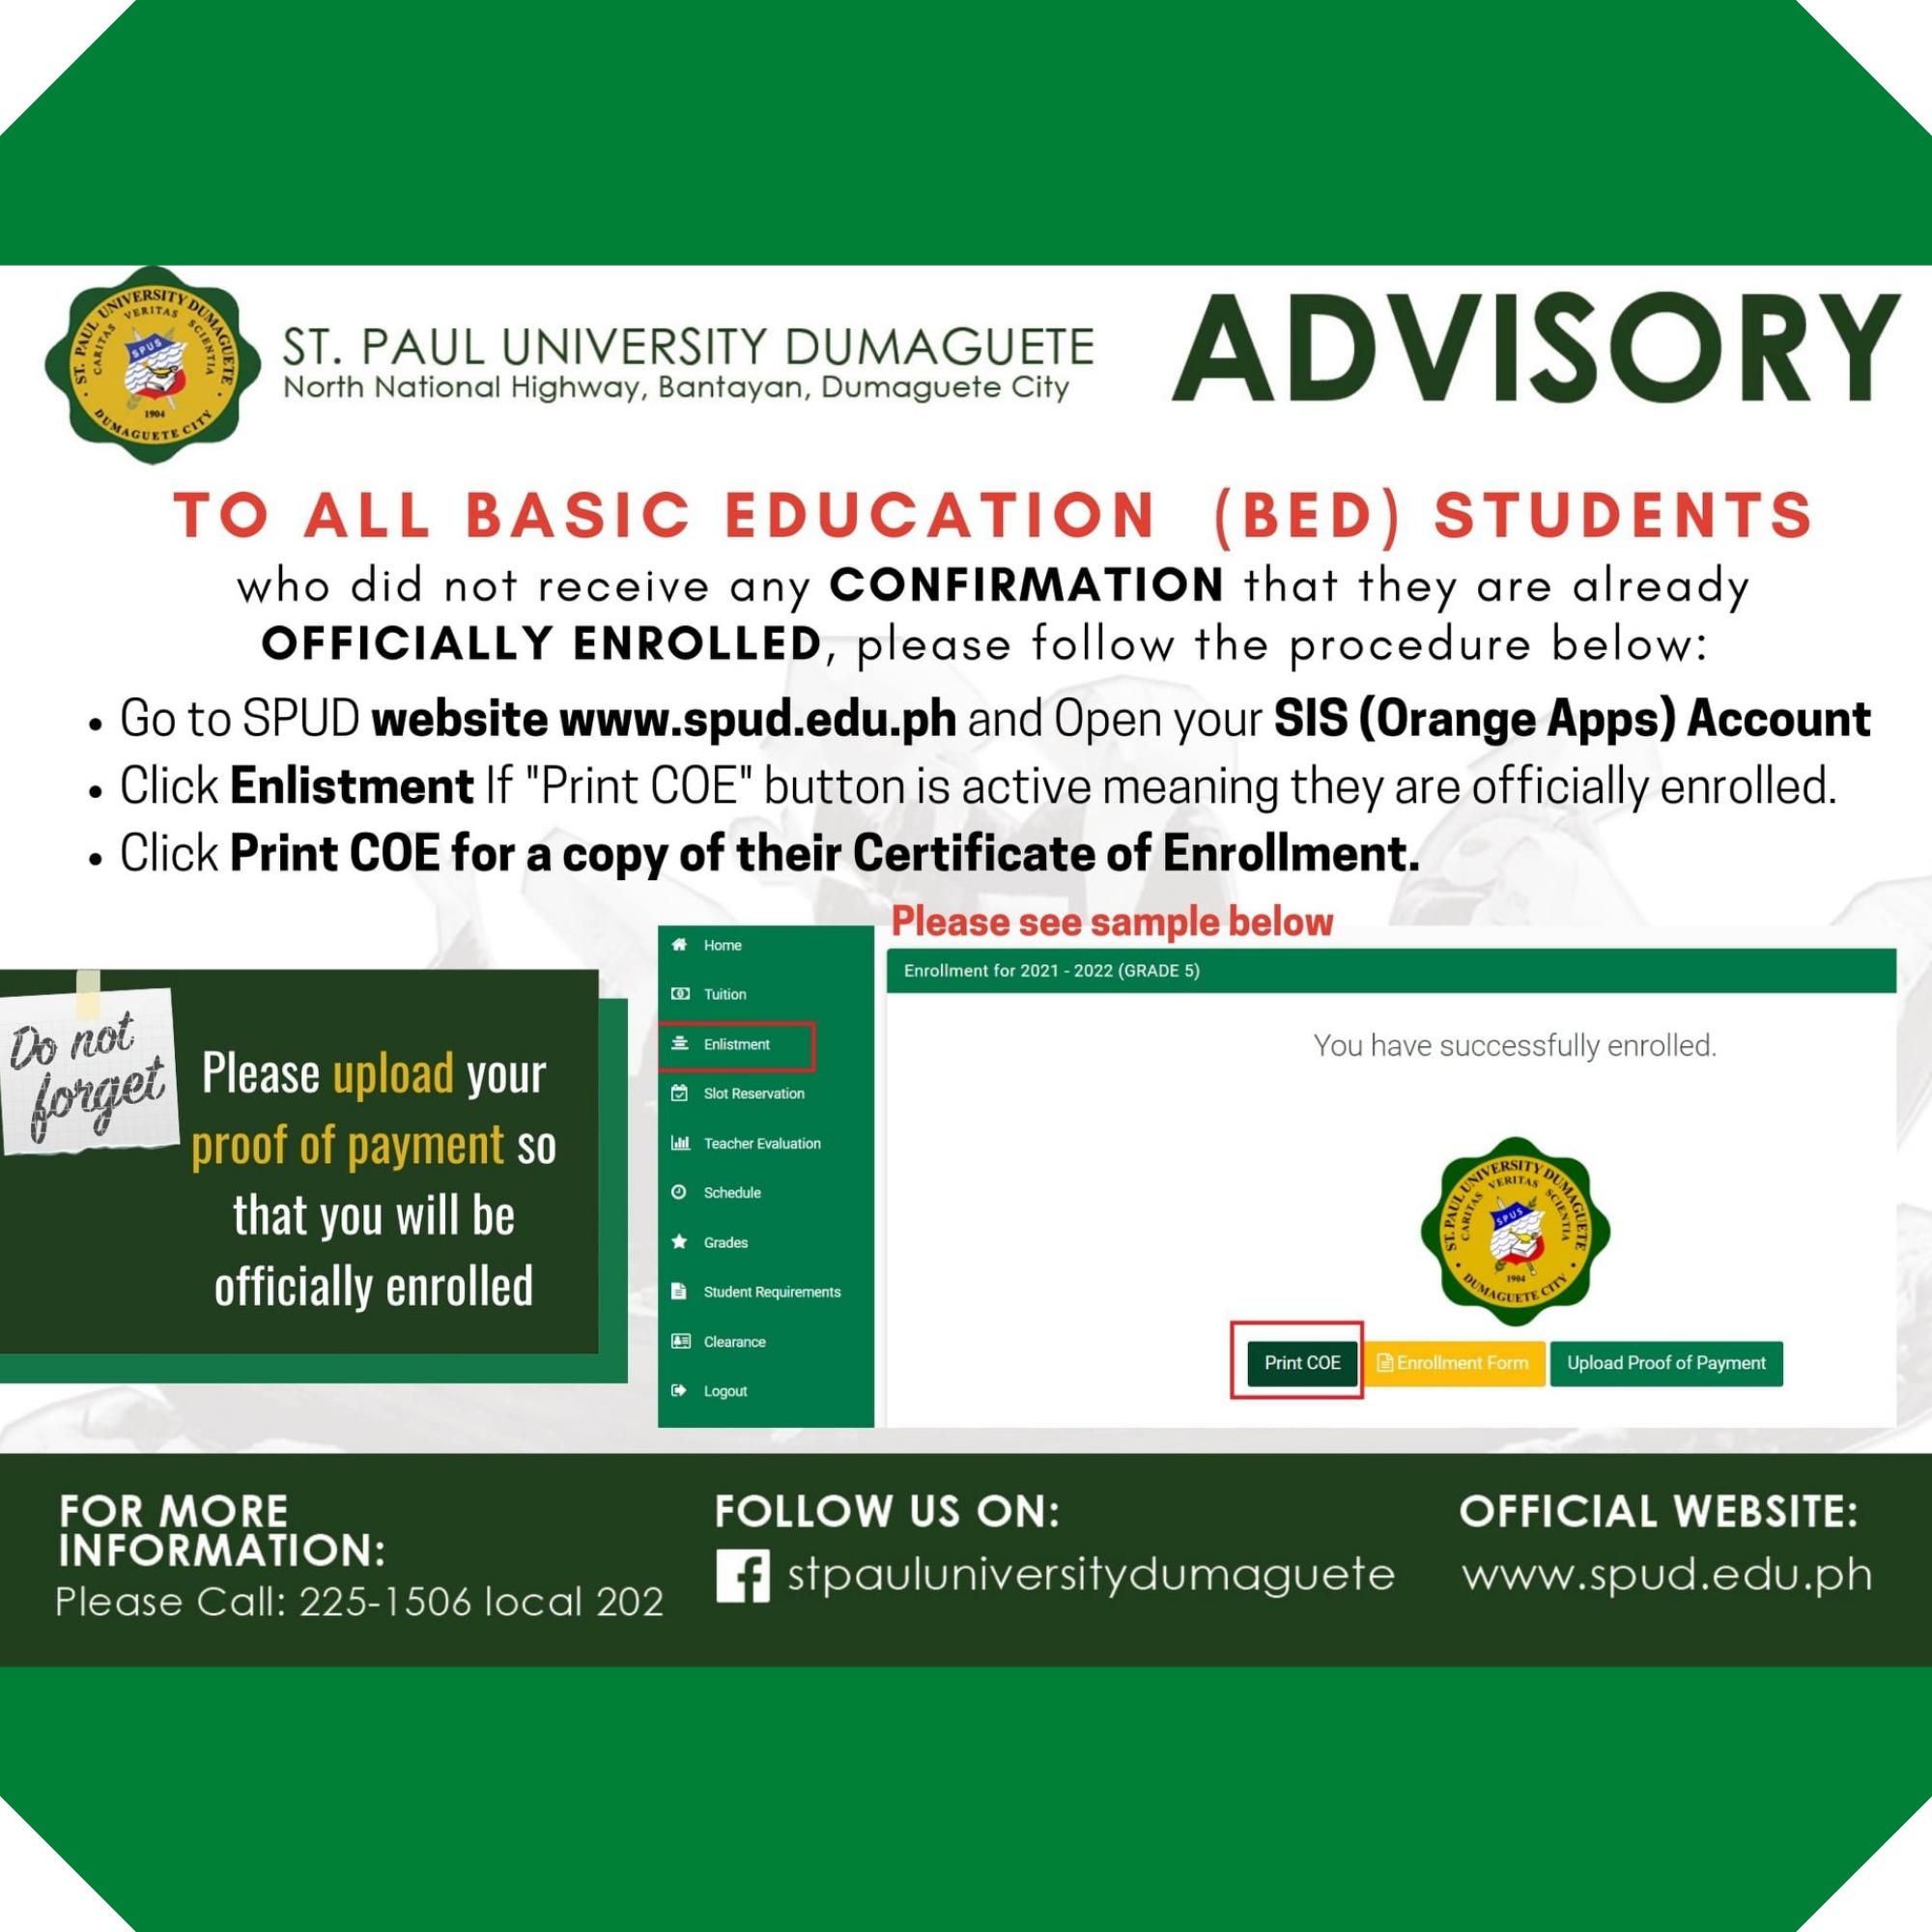 ADVISORY To All Basic Education (BED) Students